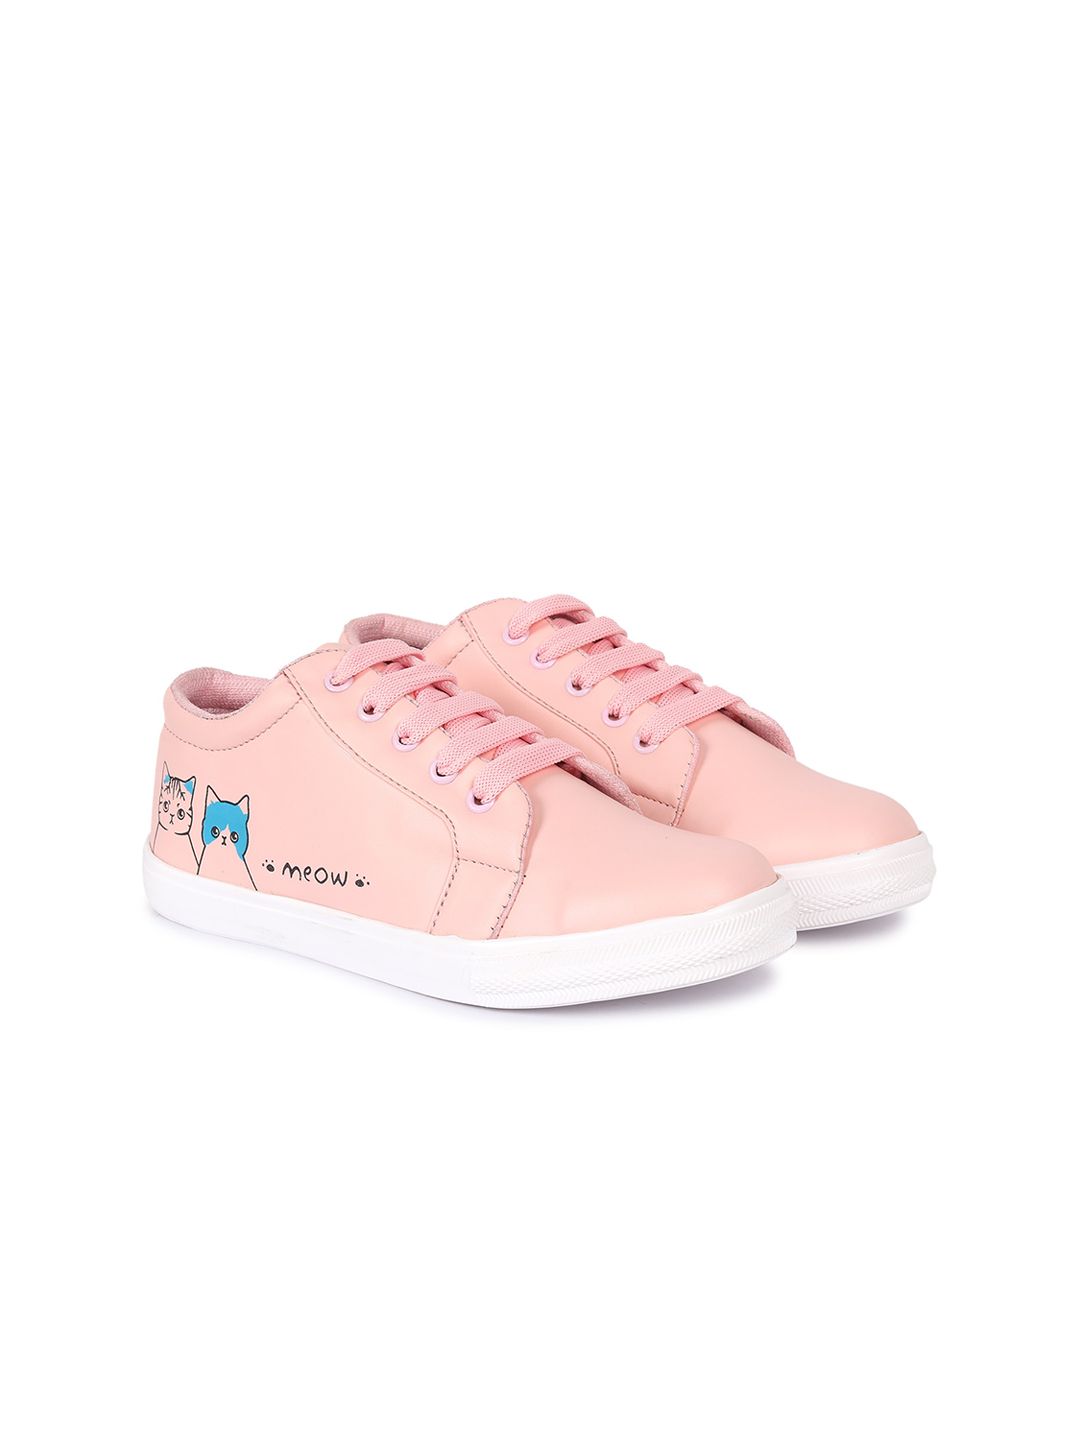 OPHELIA Women Printed Lightweight Sneakers Price in India